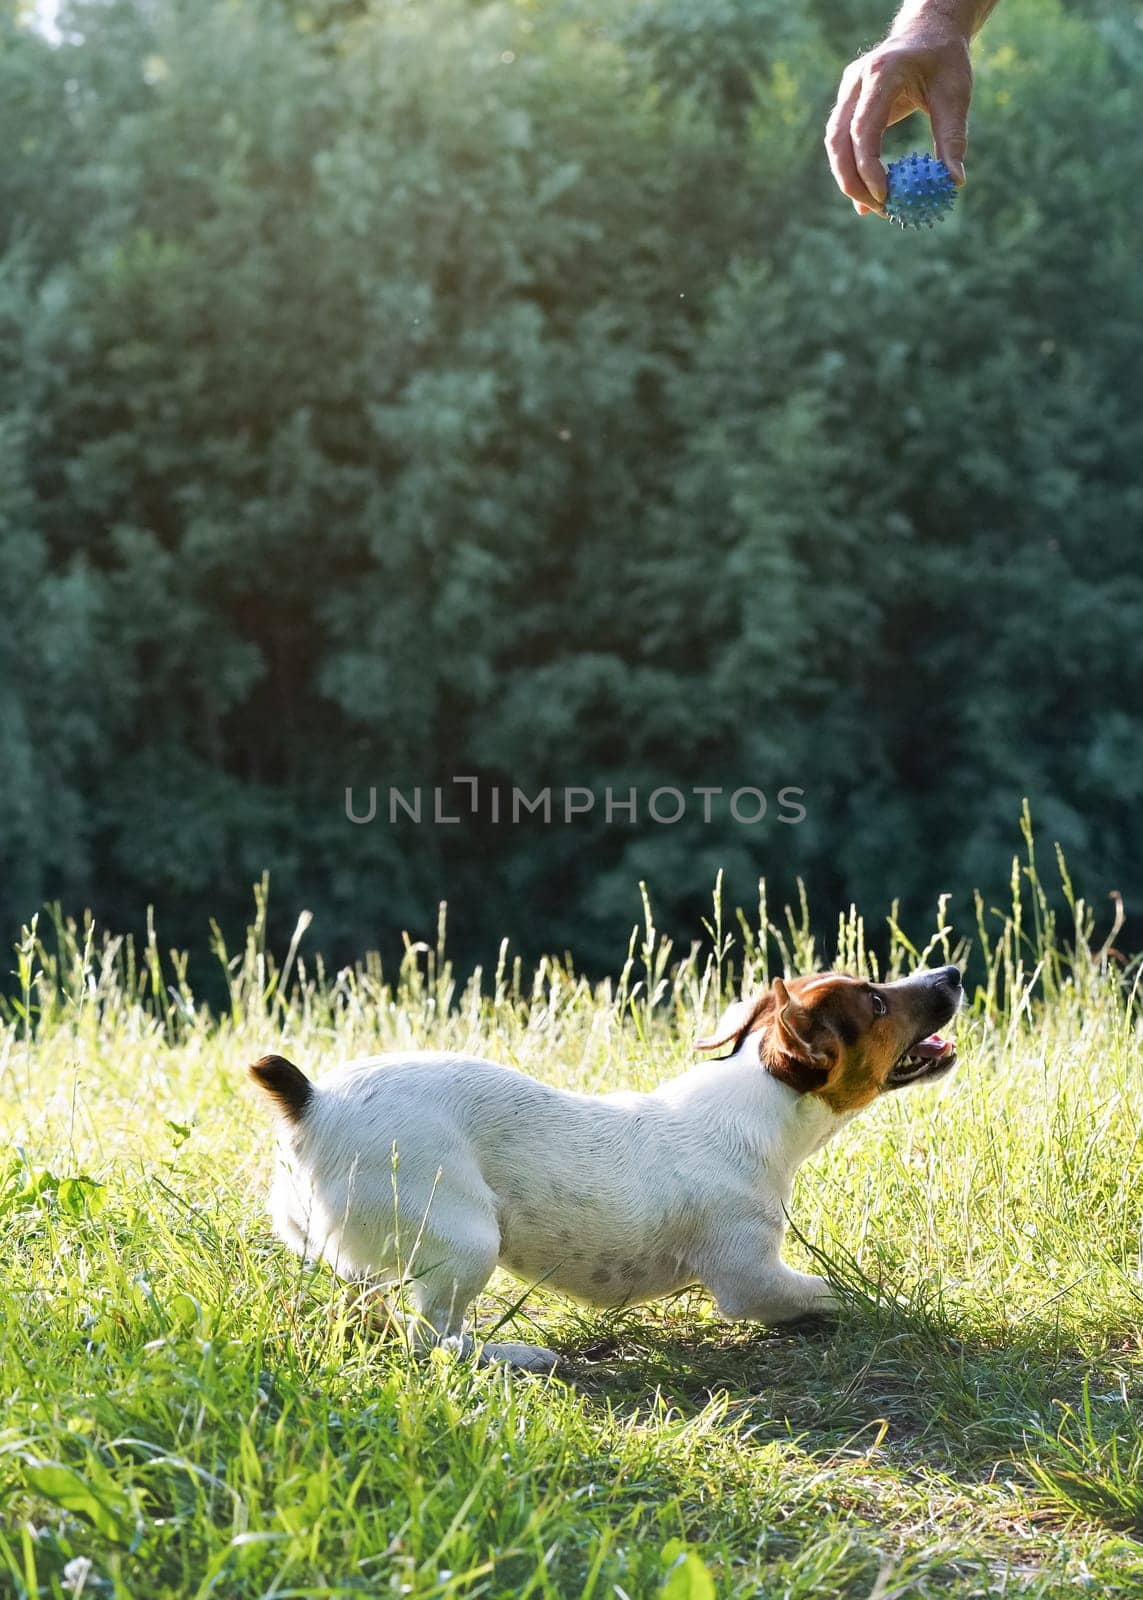 Small Jack Russell terrier crouching on ground, ready to jump as man hands hold ball toy above her, blurred trees in background by Ivanko